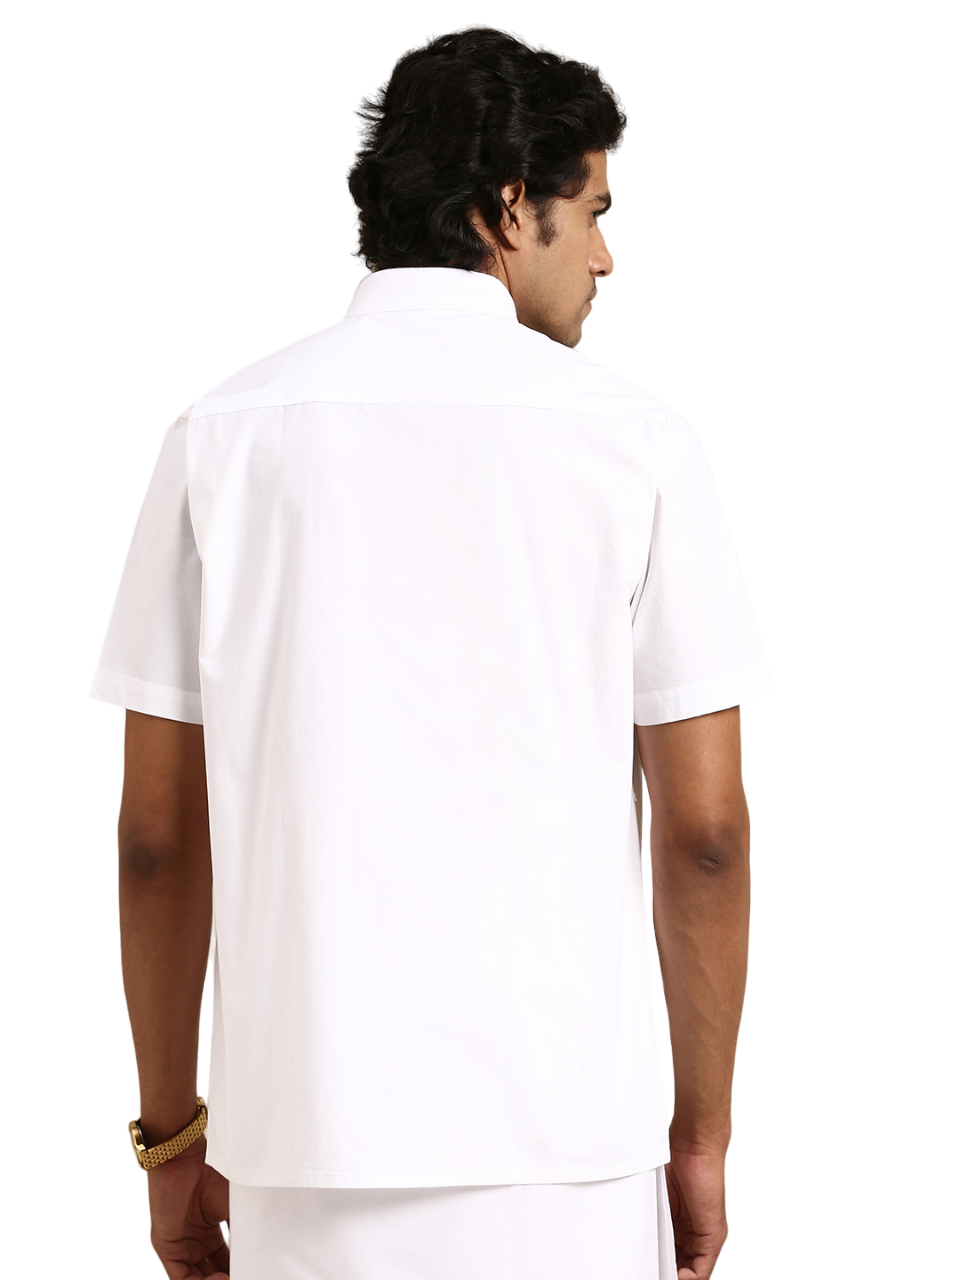 Mens 100% Cotton White Shirt Half Sleeves Chinese Collar- Back view